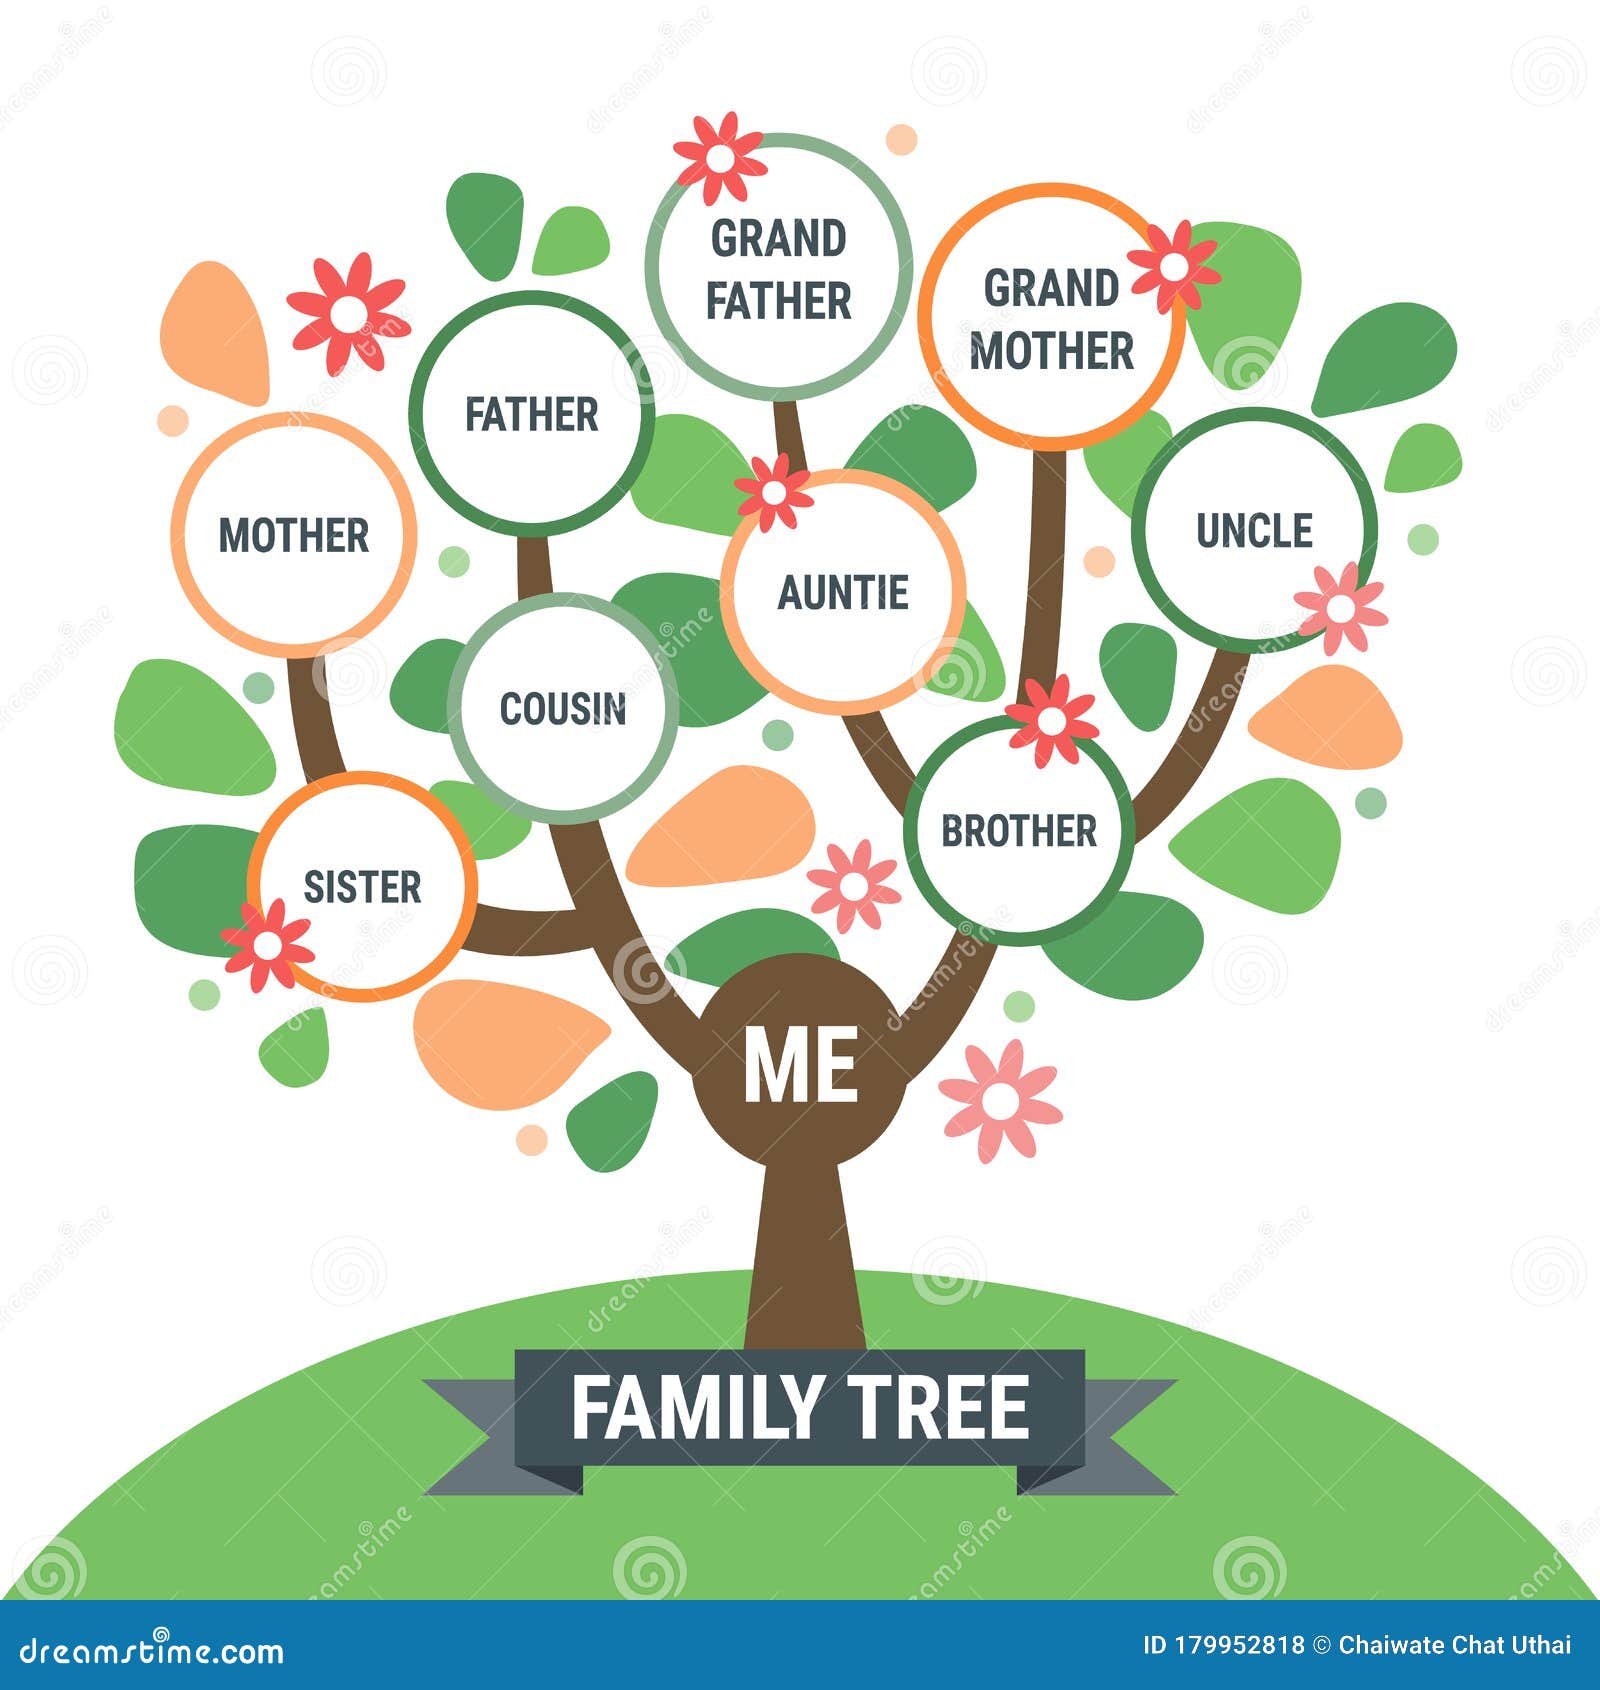 Lovely Family Tree With Decorative Flowers Stock Vector Illustration Of Genealogical Diagram 179952818